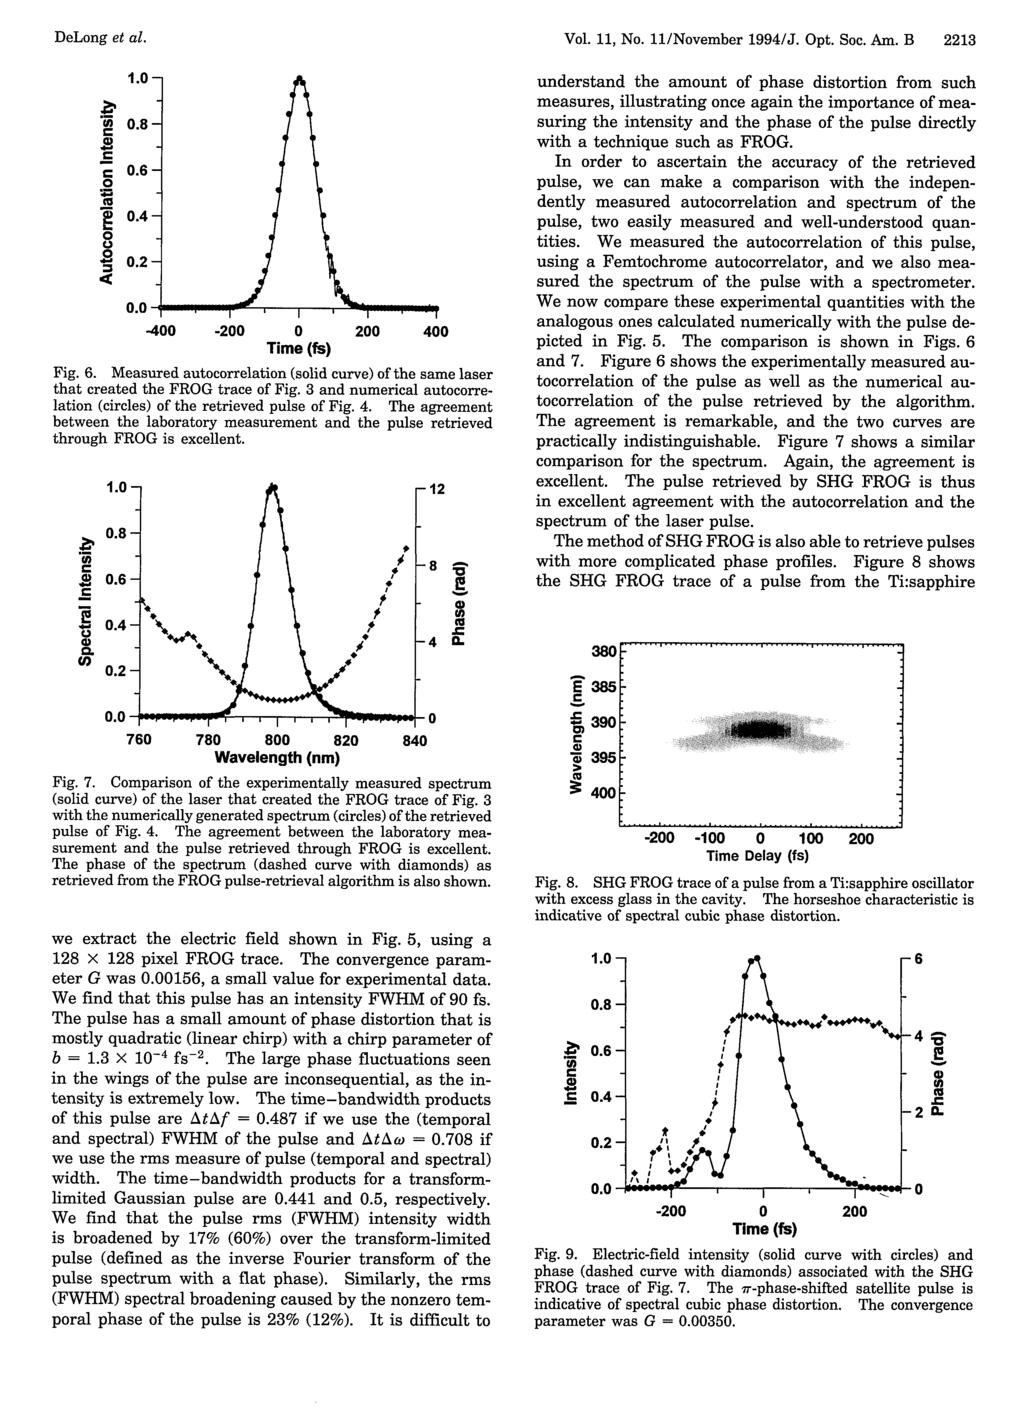 DeLong et al... at 0(U 0 1.0 0.8-0.6-0.4 0.2 0.0- _ -400-200 0 200 400 Time (fs) Fig. 6. Measured autocorrelation (solid curve) of the same laser that created the FROG trace of Fig.